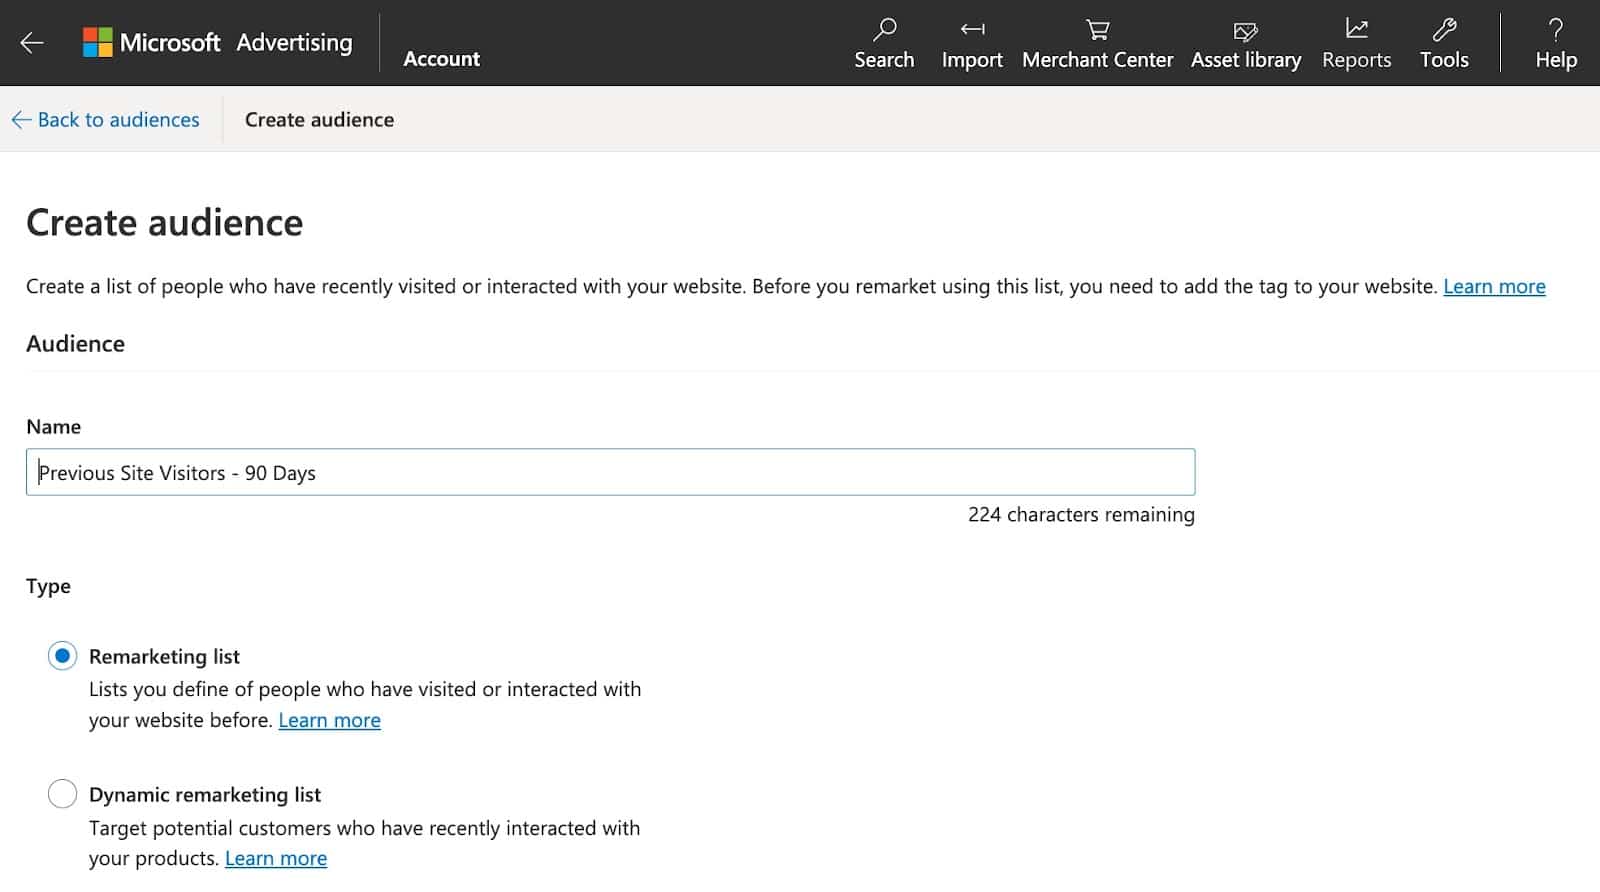 Creating a Remarketing List in the Microsoft Advertising platform